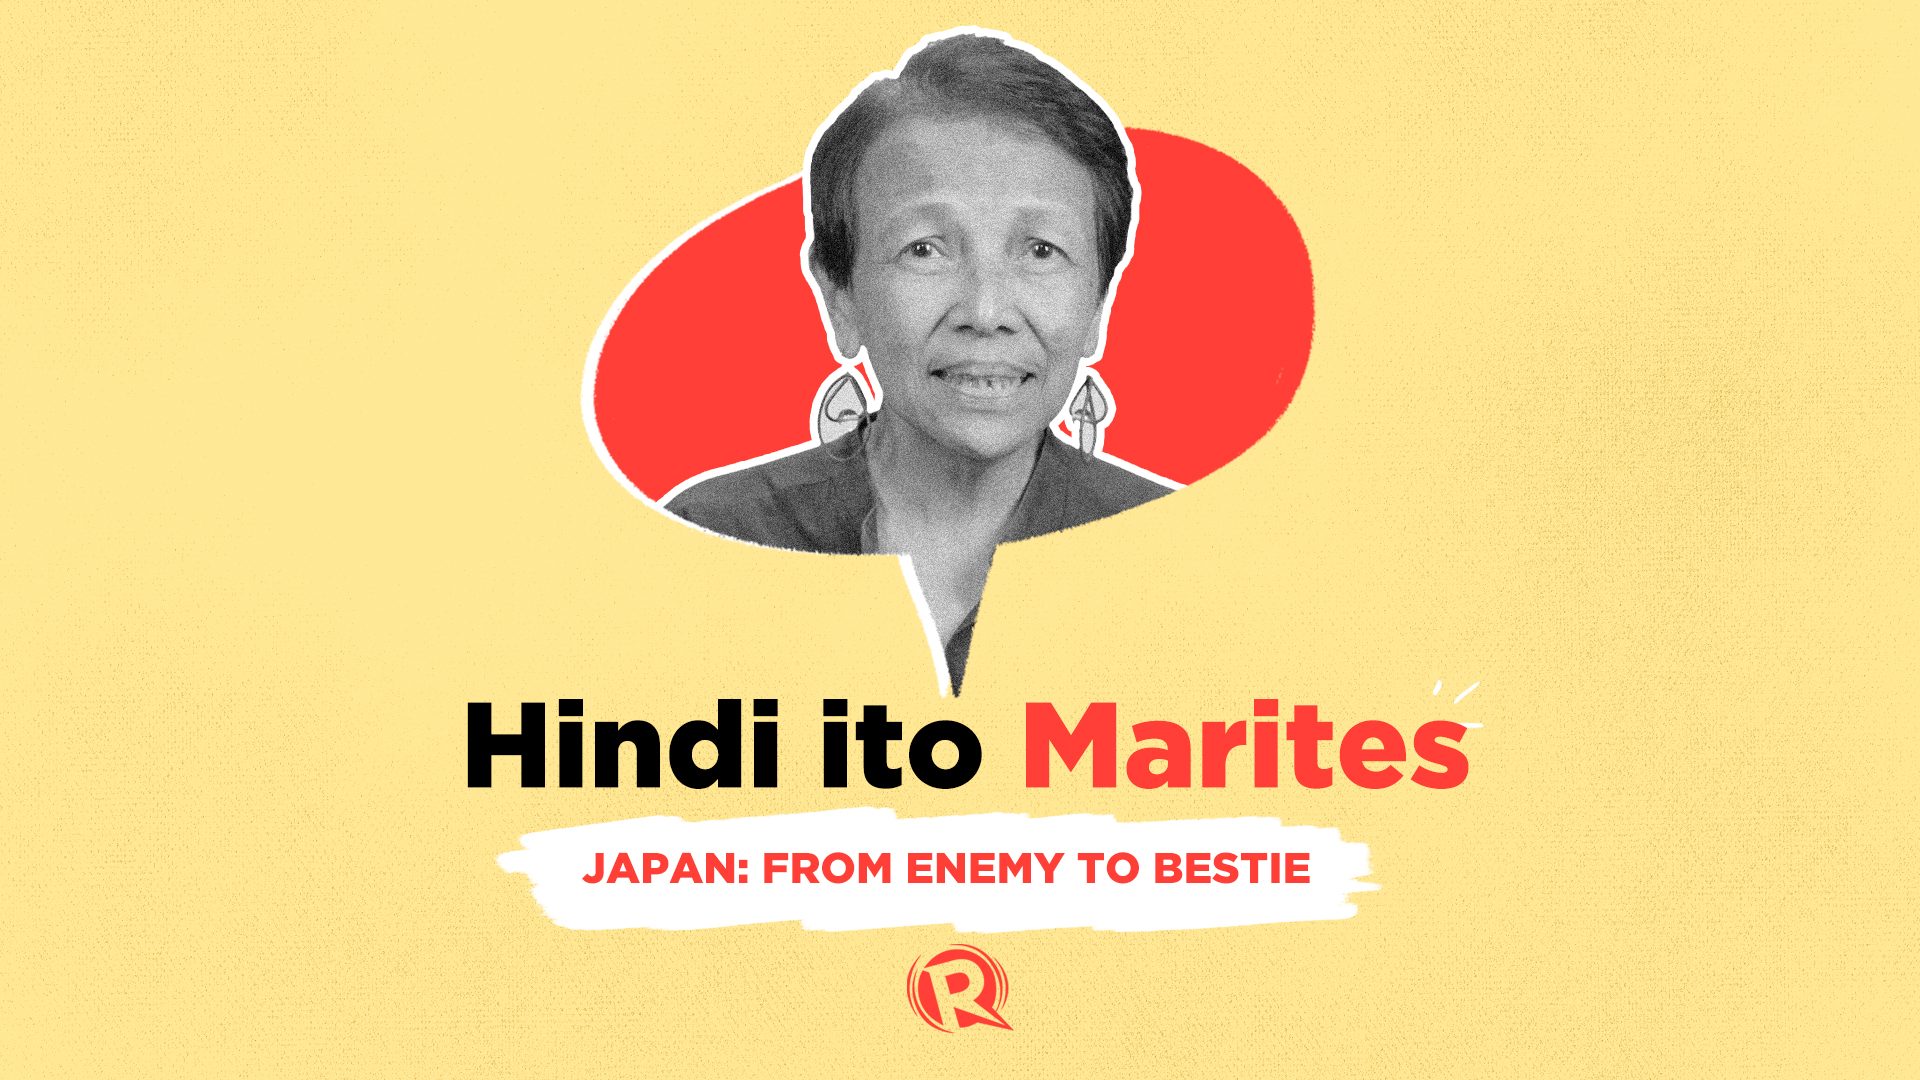 [Hindi ito Marites] Japan: From enemy to bestie